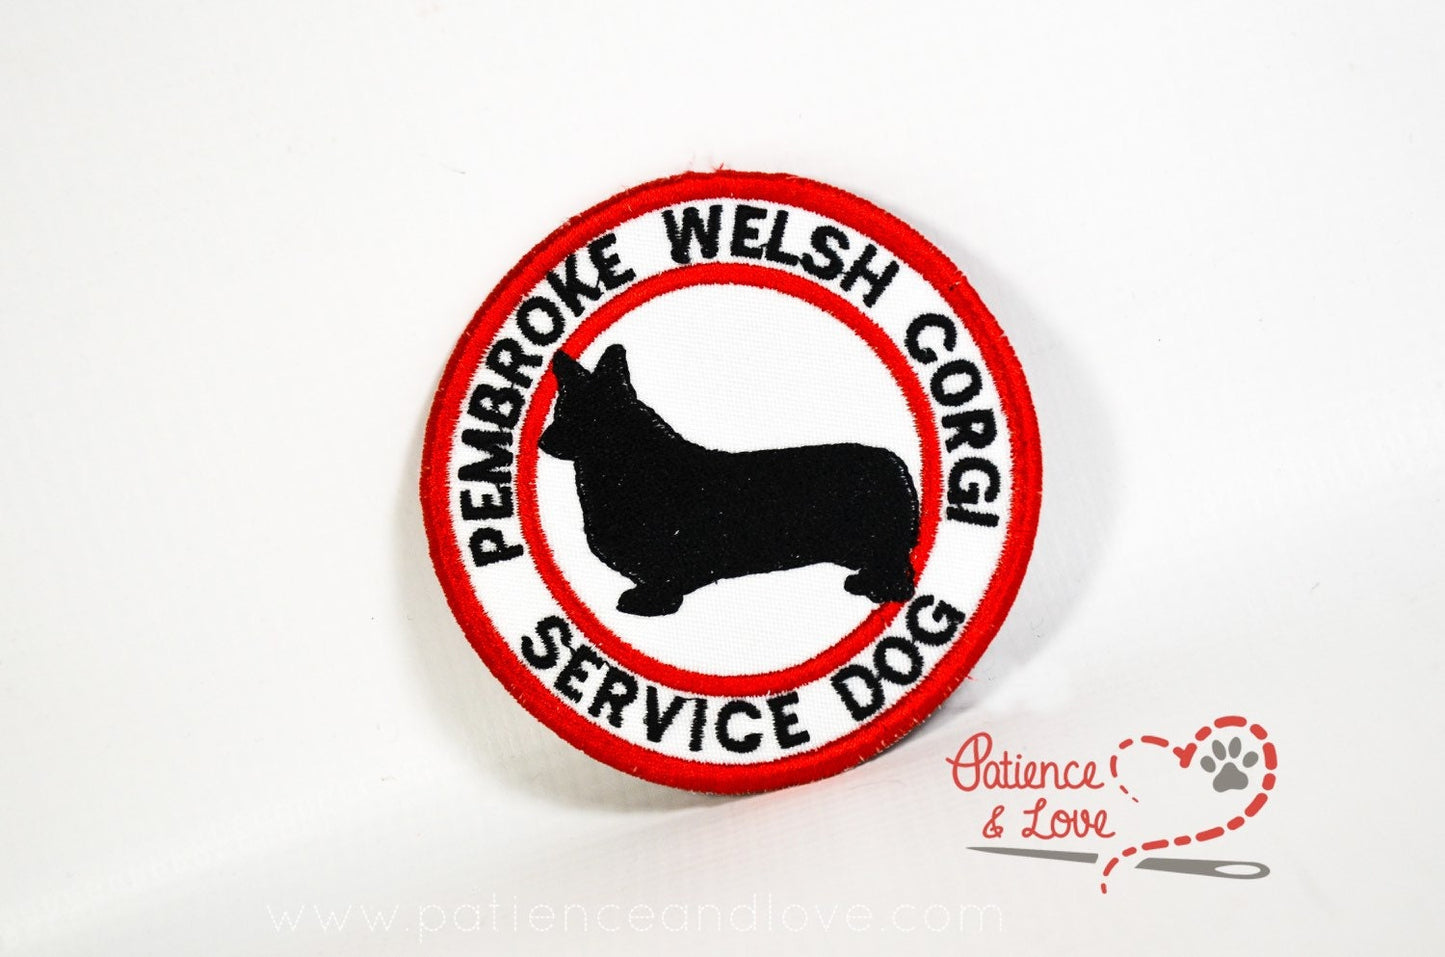 Breed, BEAUCERON Service Dog, Select your breed, 3 inch round patch